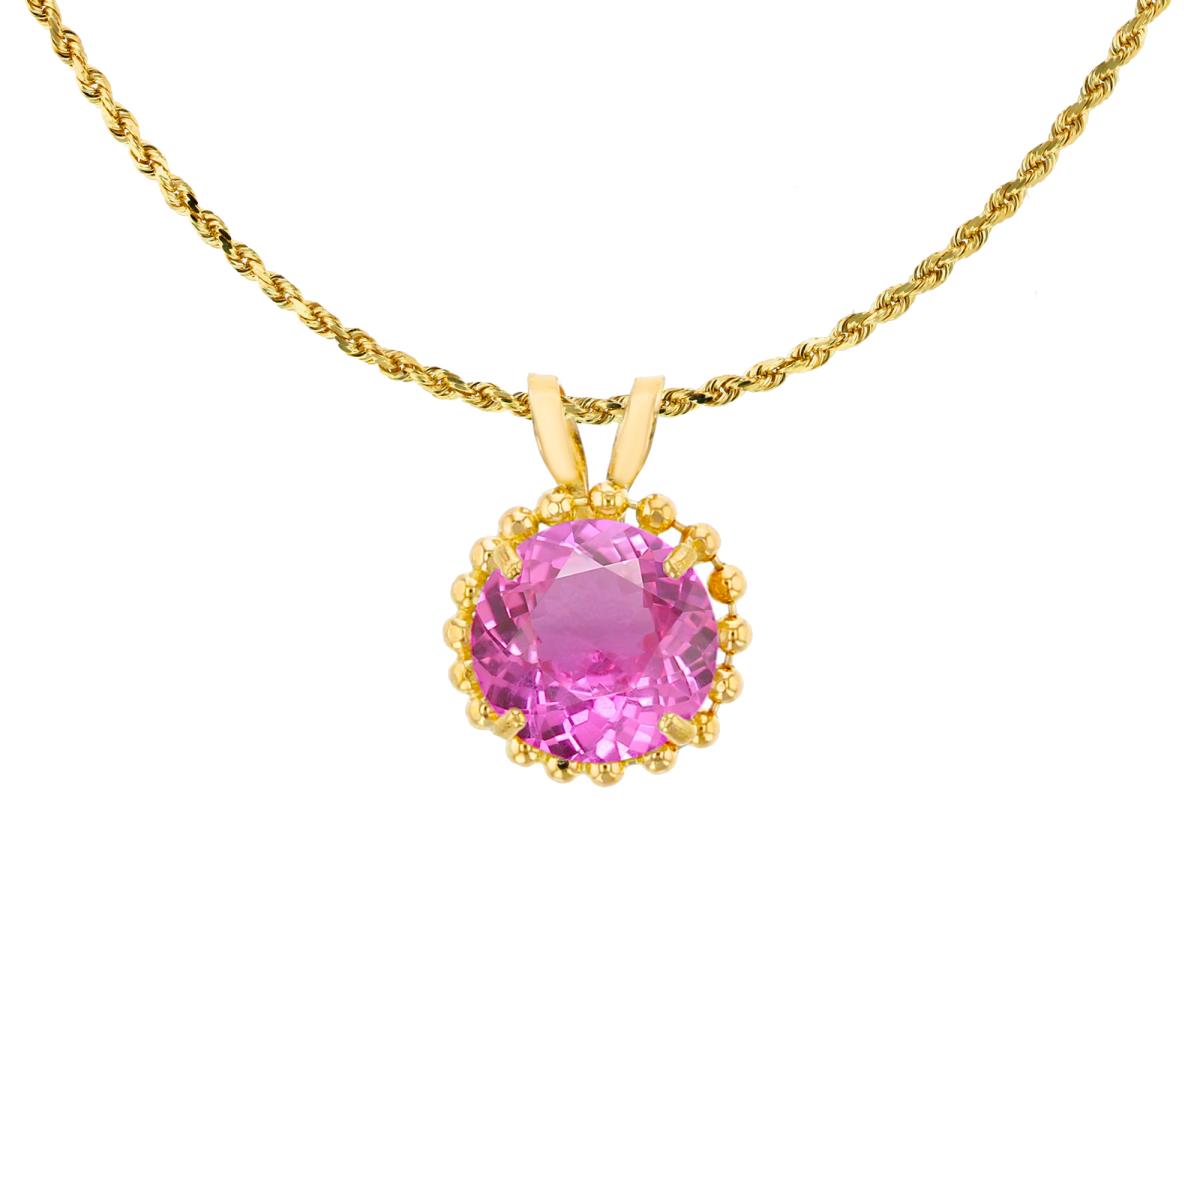 10K Yellow Gold 6mm Rd Cut Created Pink Sapphire with Bead Frame Rabbit Ear 18" Necklace